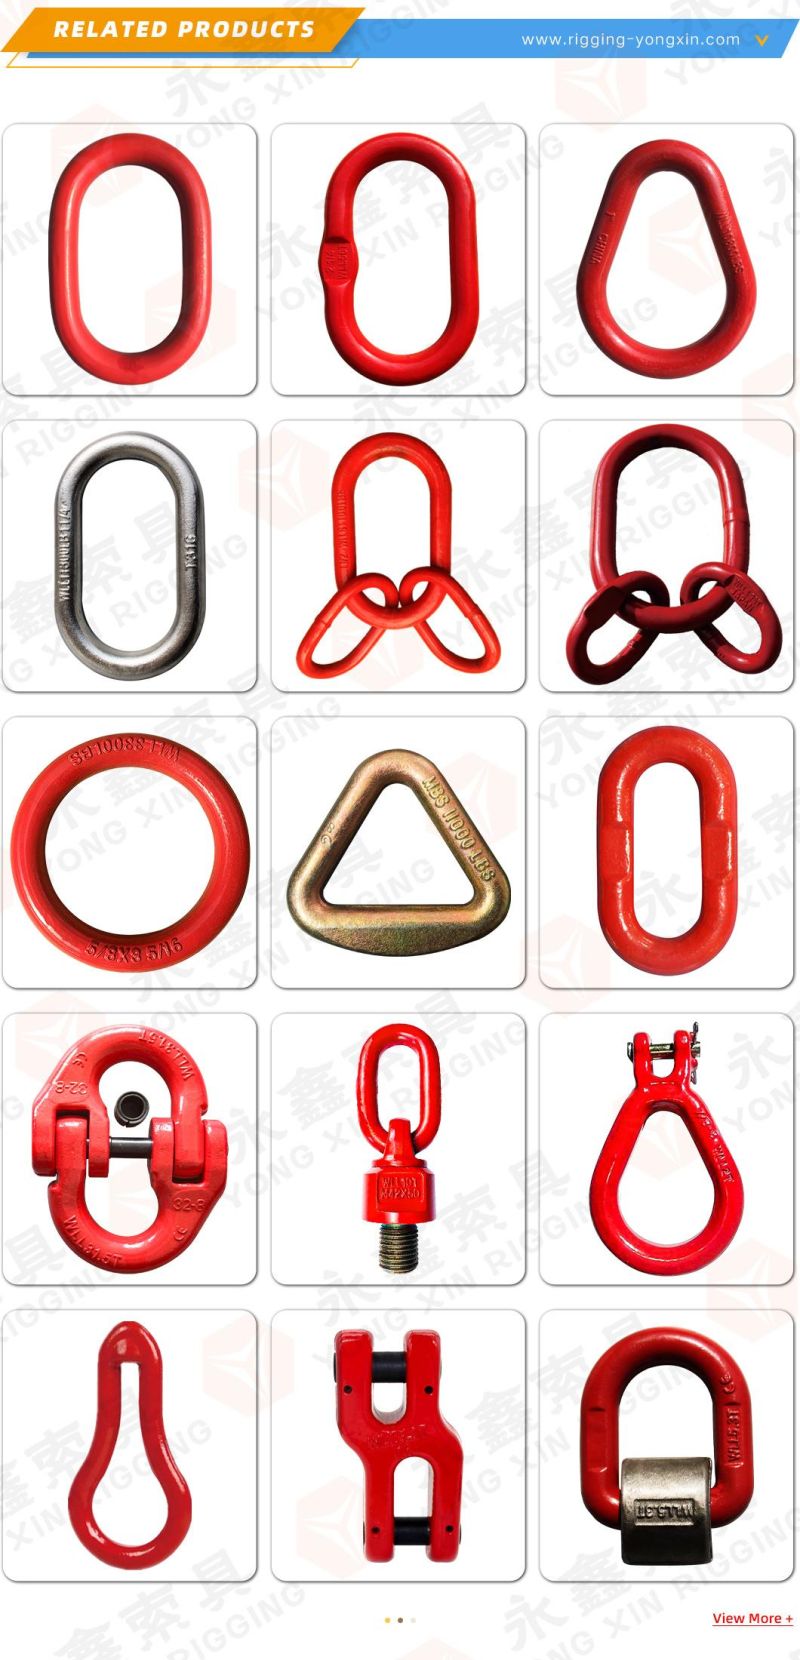 Factory Price End Link|Alloy Various Color Rigging with Weedless Ring Weedless End Link